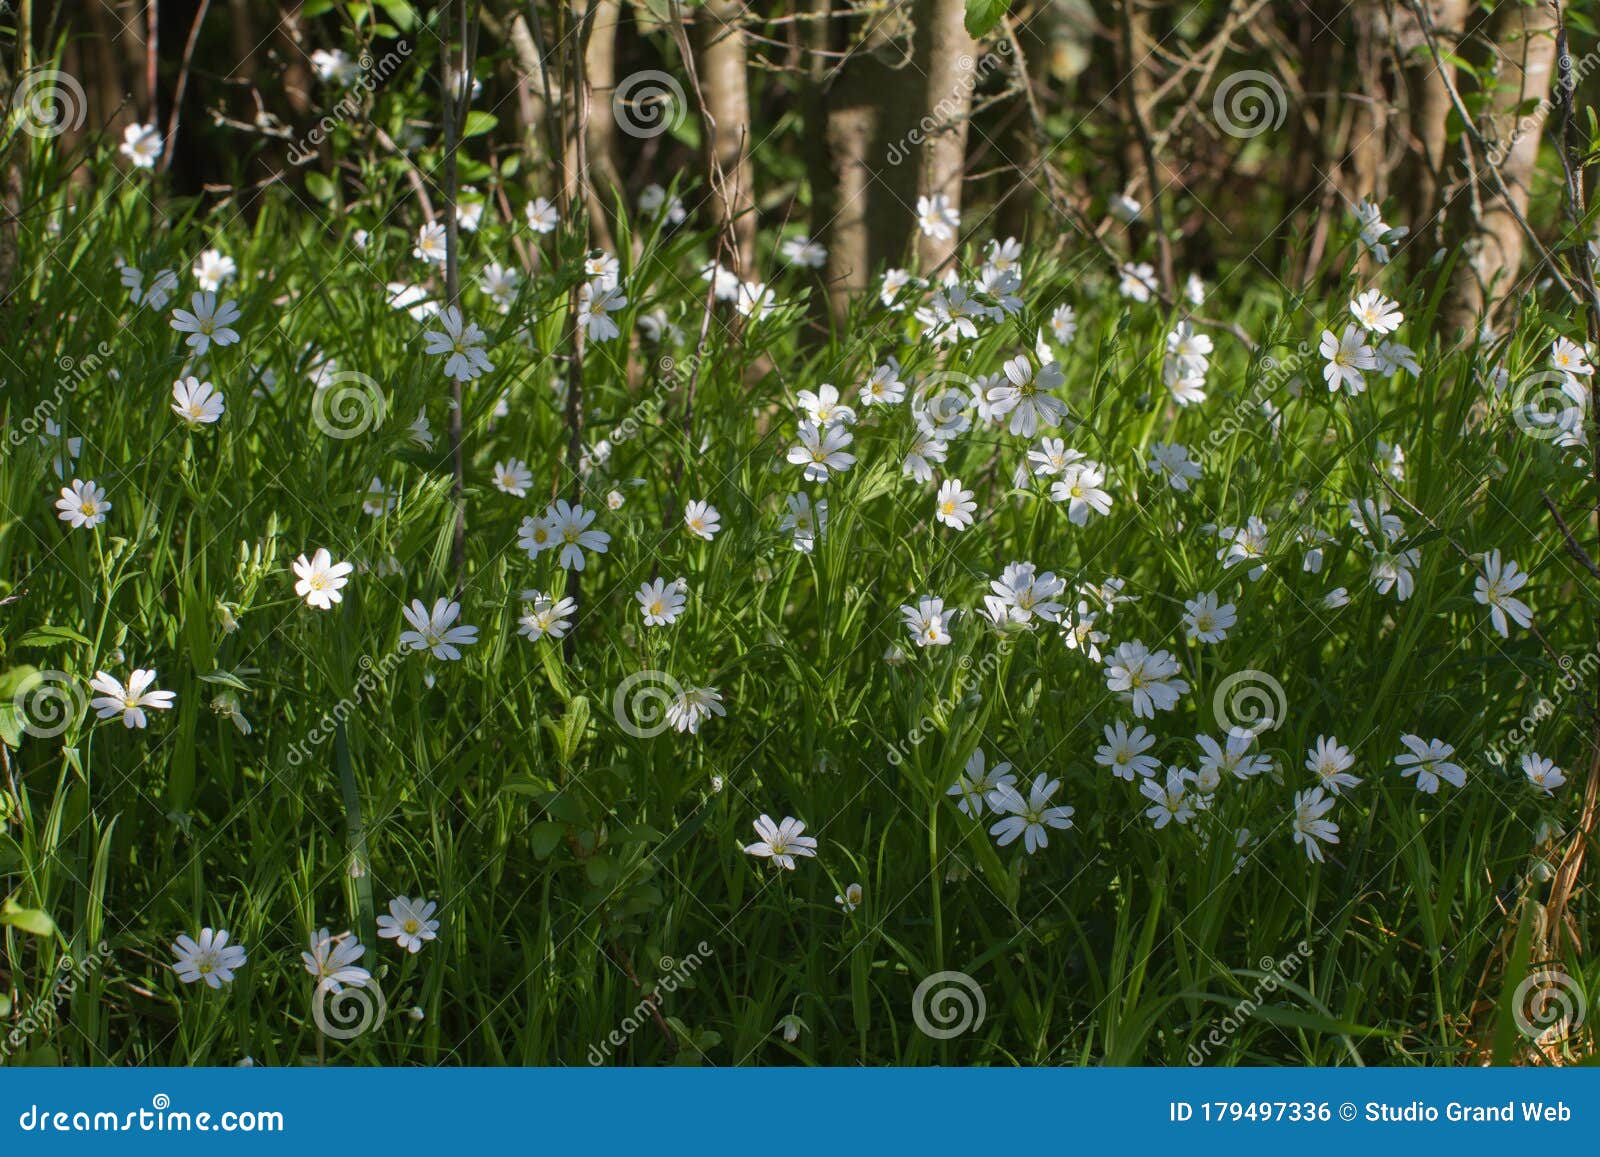 wildflowers of stellaria holostea with woods background in springtime shadow